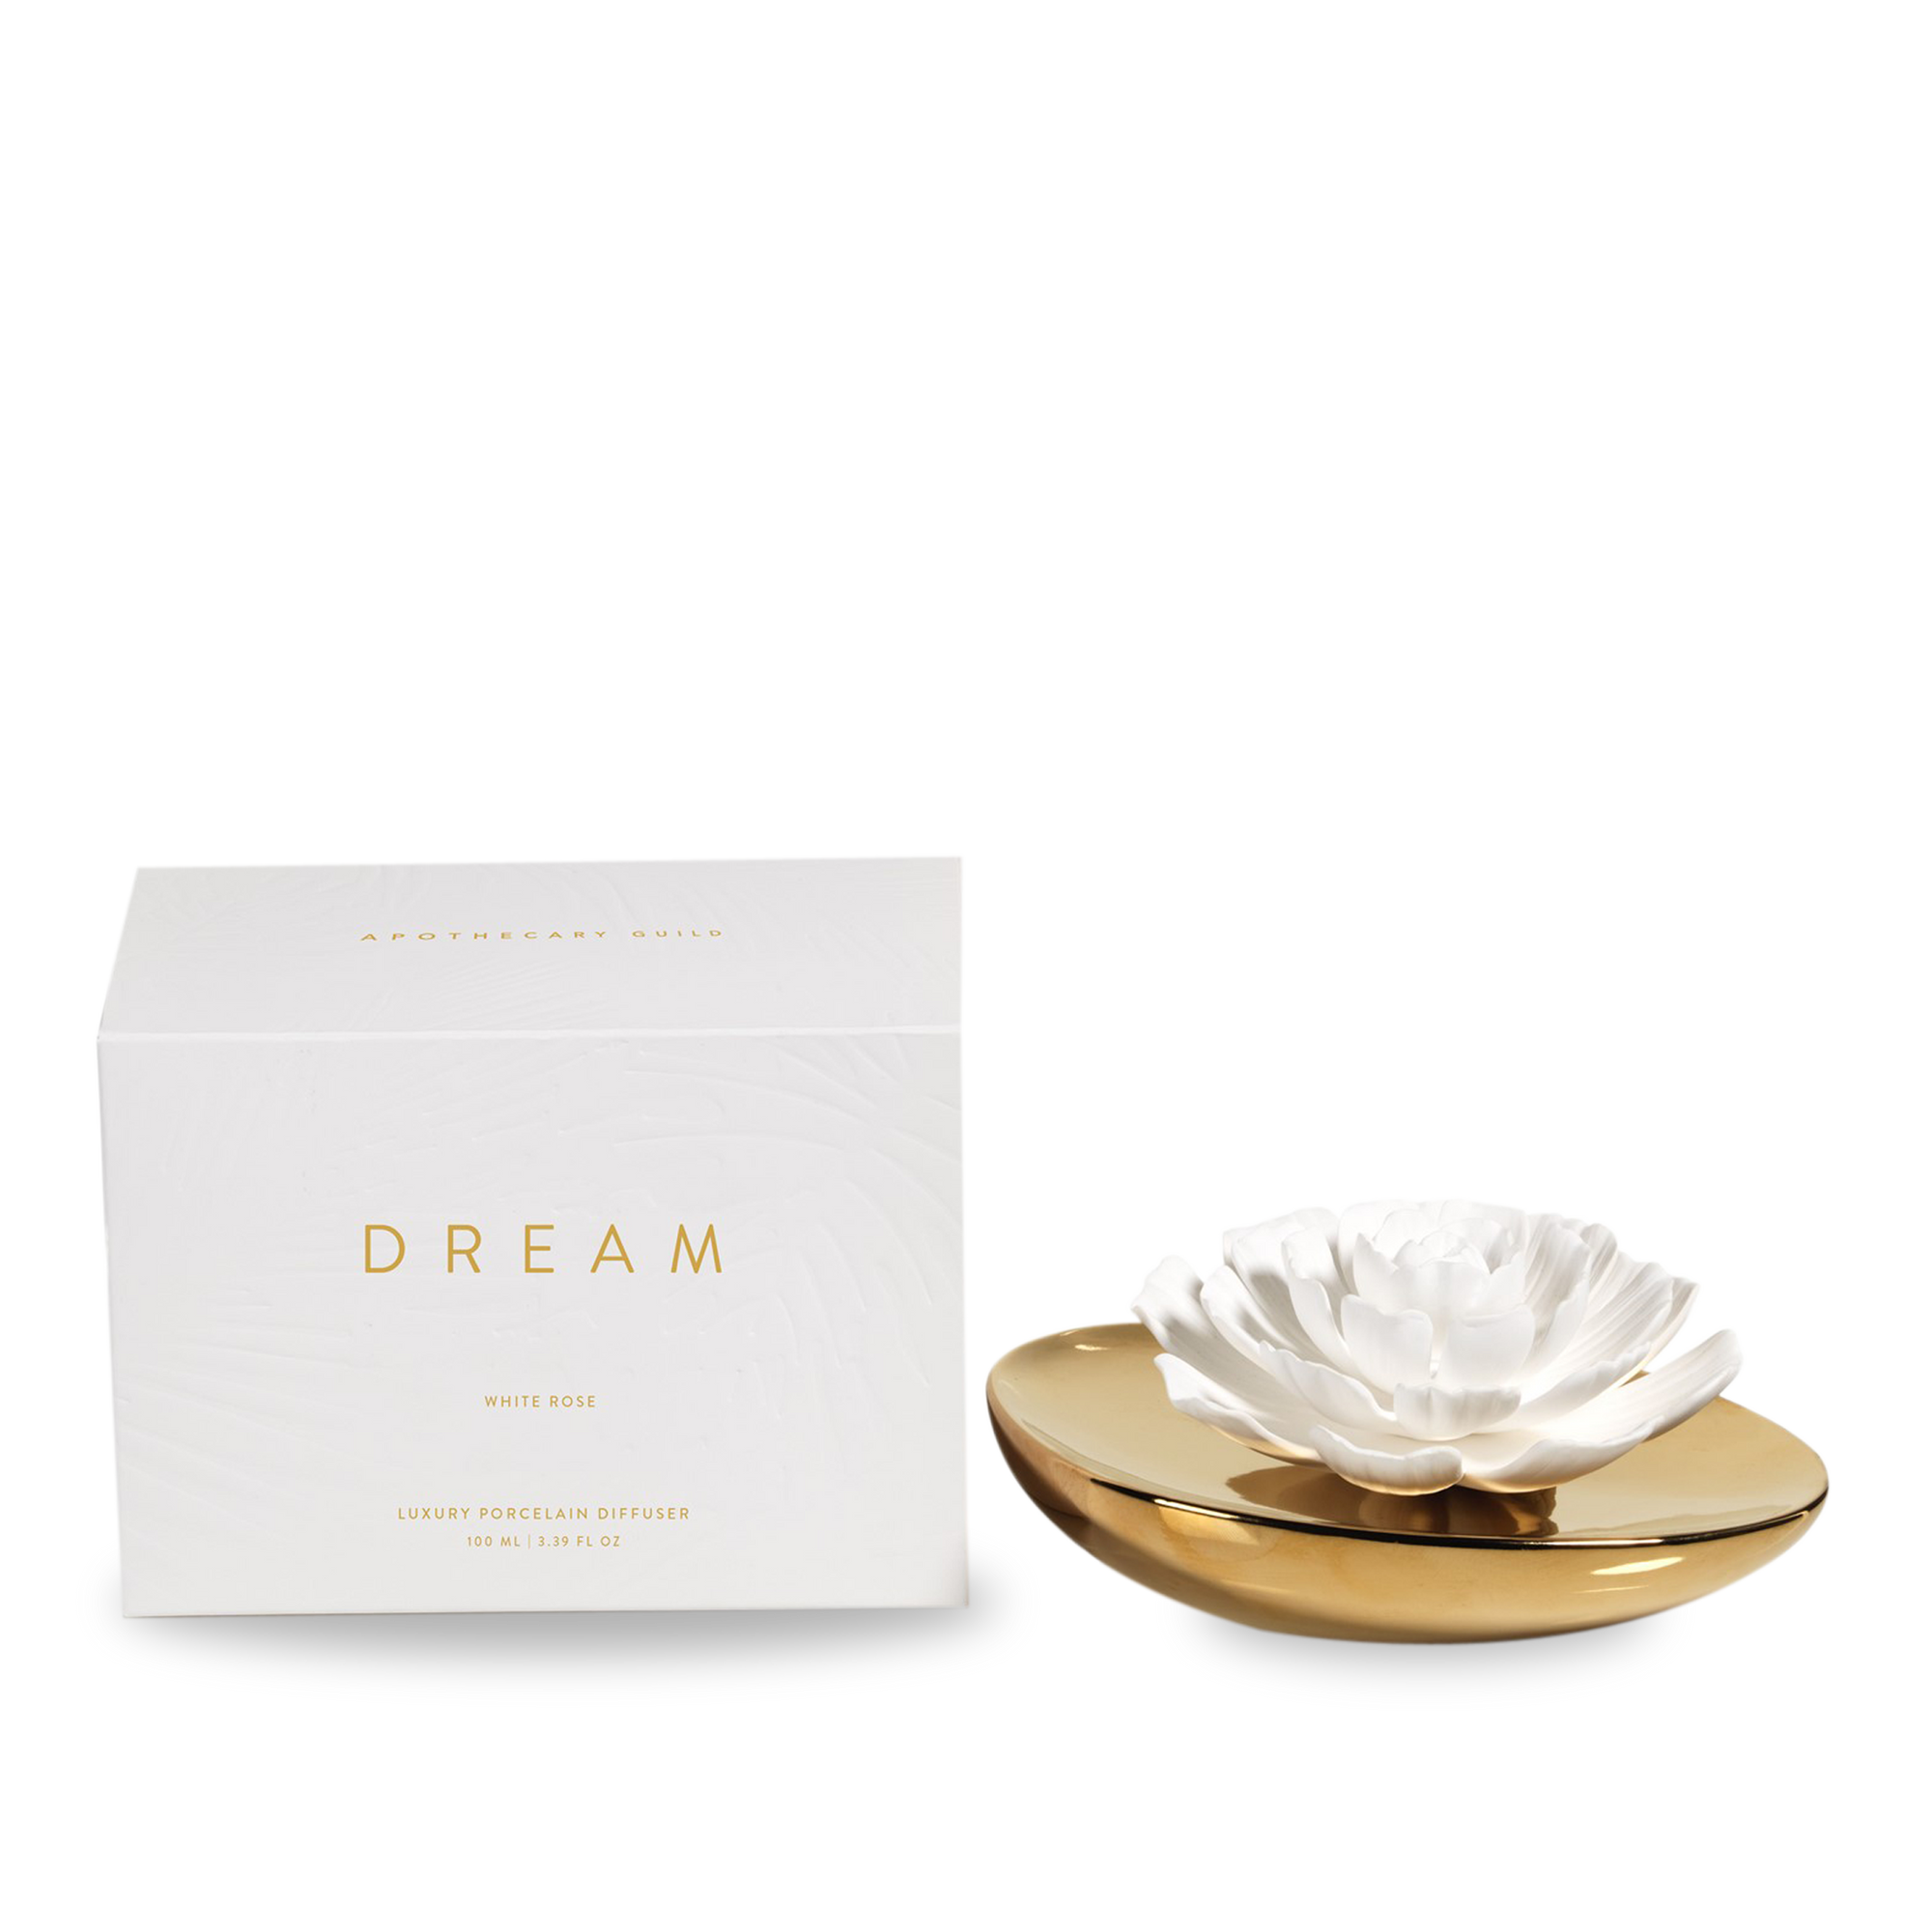 This elegant Dream diffuser allows a soft and subtle frangrance to waft through your room through its floral porcelain topper.